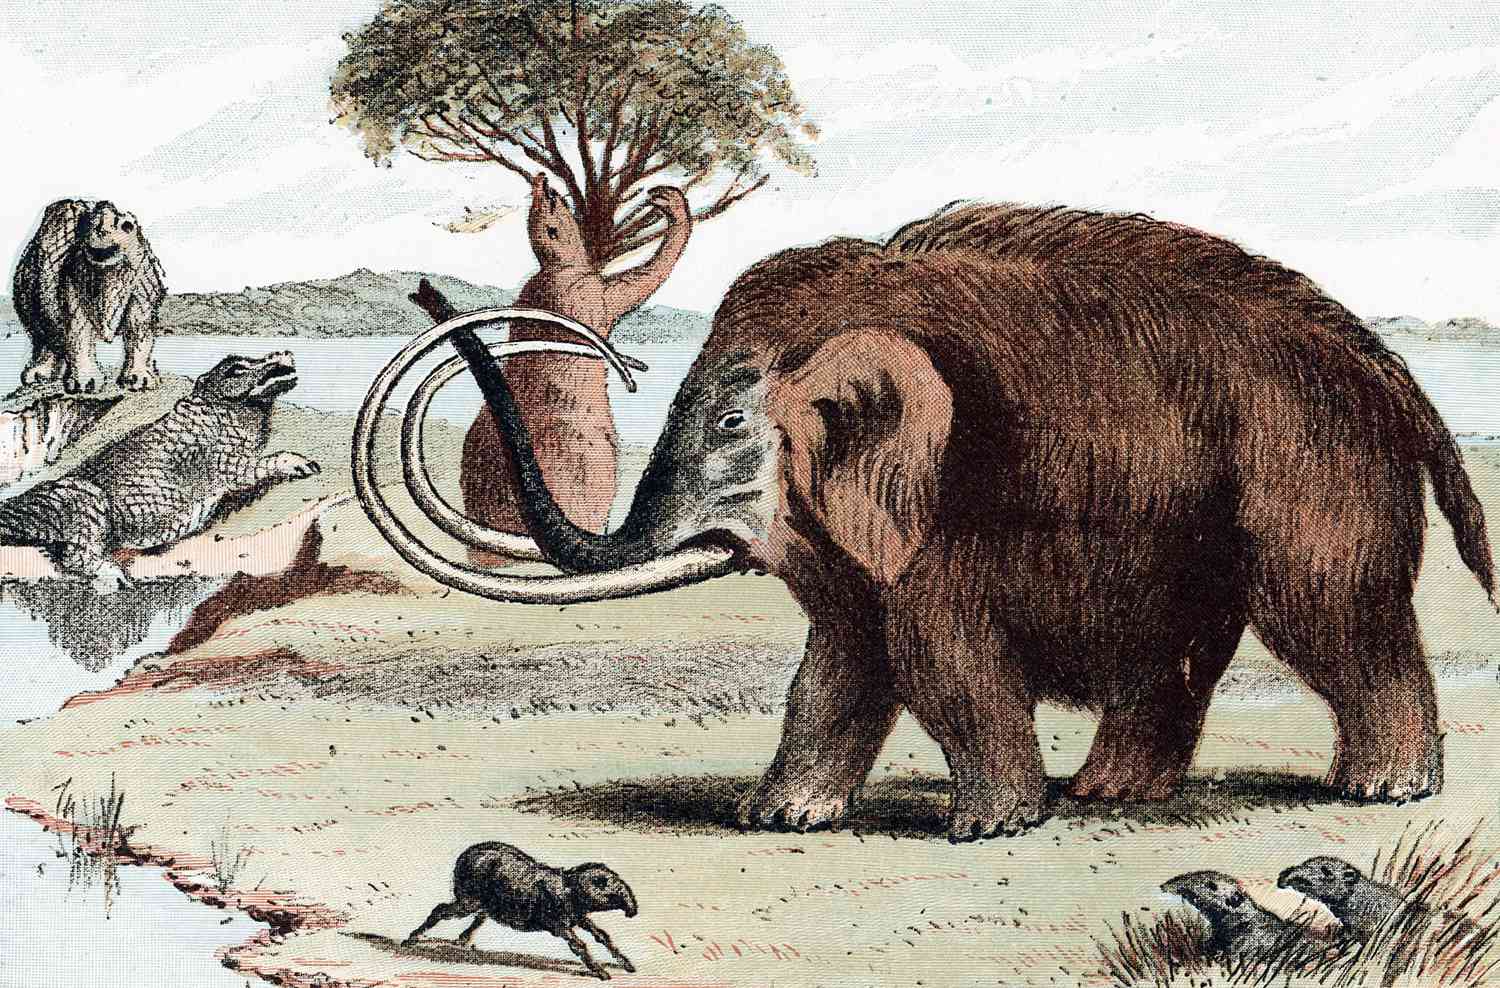 Woolly Mammoth (Mammuthus) extinct genus of elephant from Pleistocene Epoch (2,500,000 to 10,000 years ago) found in fossil deposits and in northern Europe as 30,000 year-old frozen carcasses in melting glaciers. From popular geology book published London